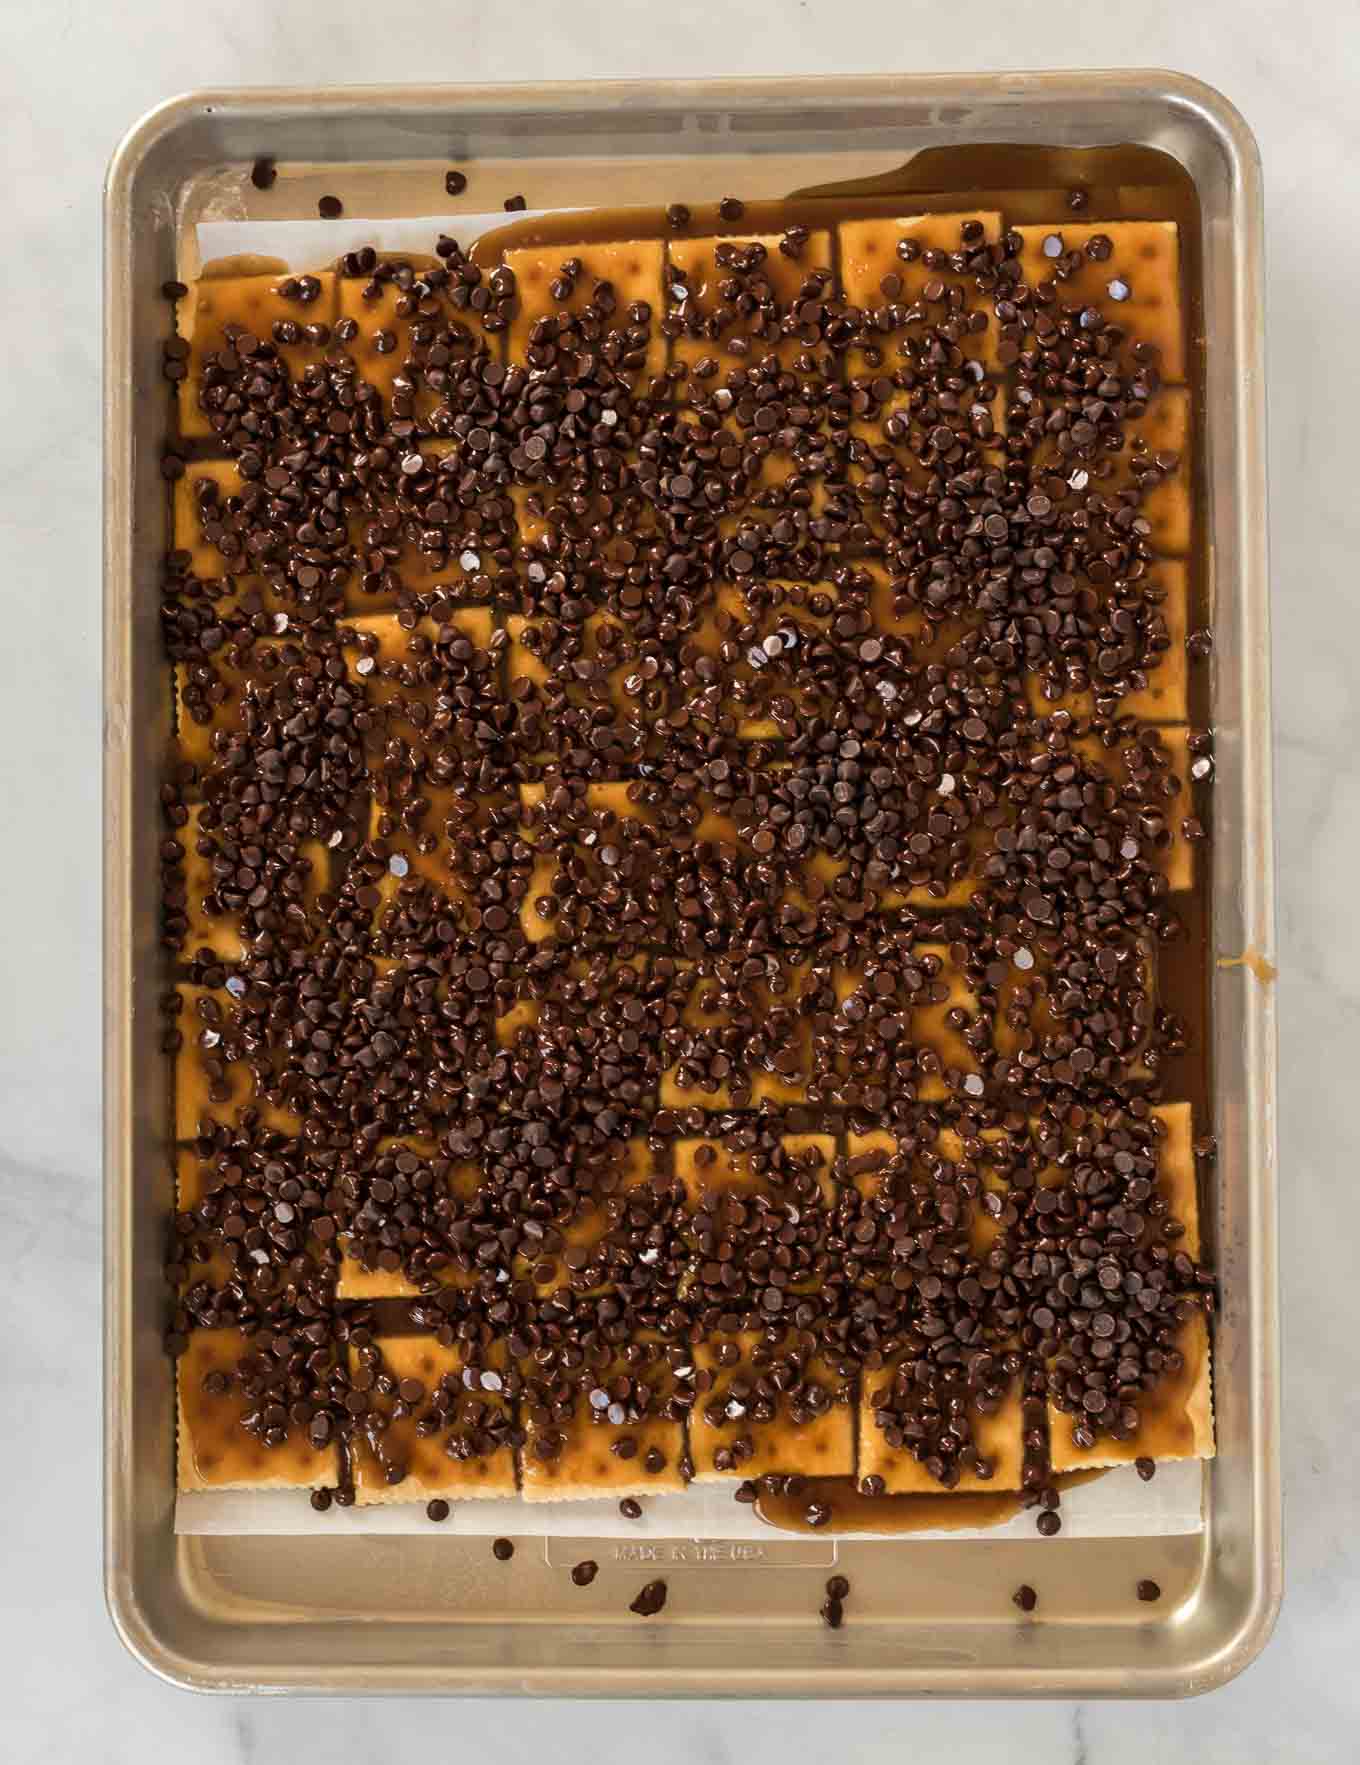 saltines on a baking sheet covered with toffee and chocolate chips